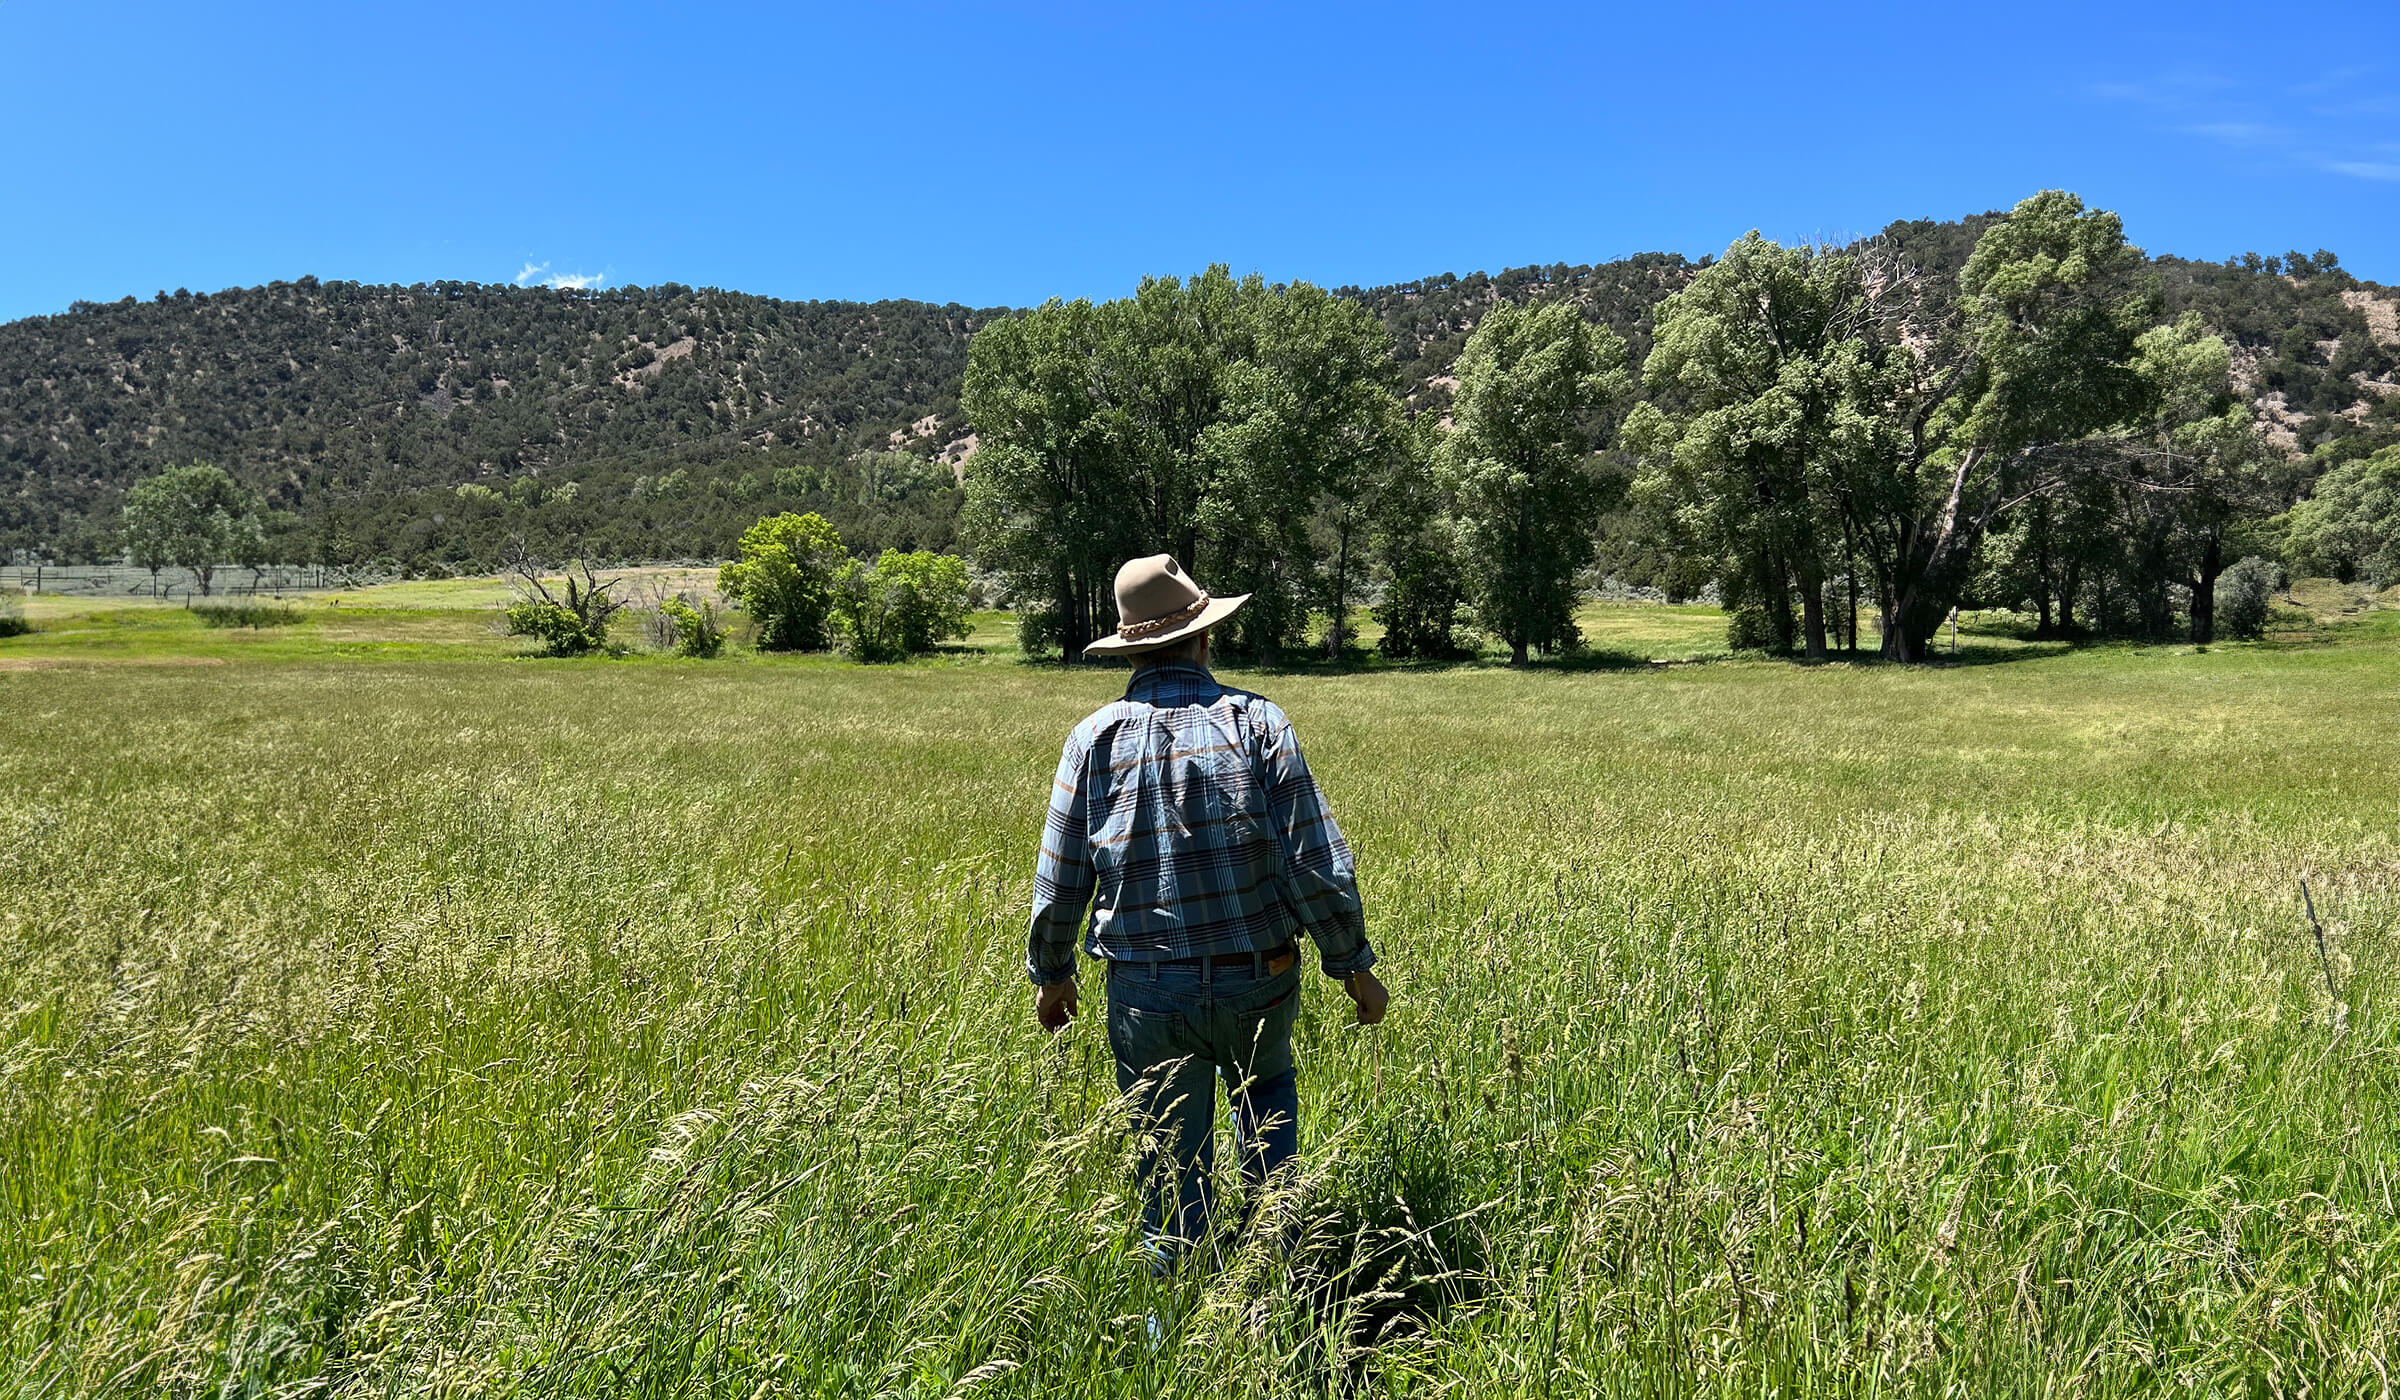 A man in a hat and flannel shirt walking through a field of tall grasses